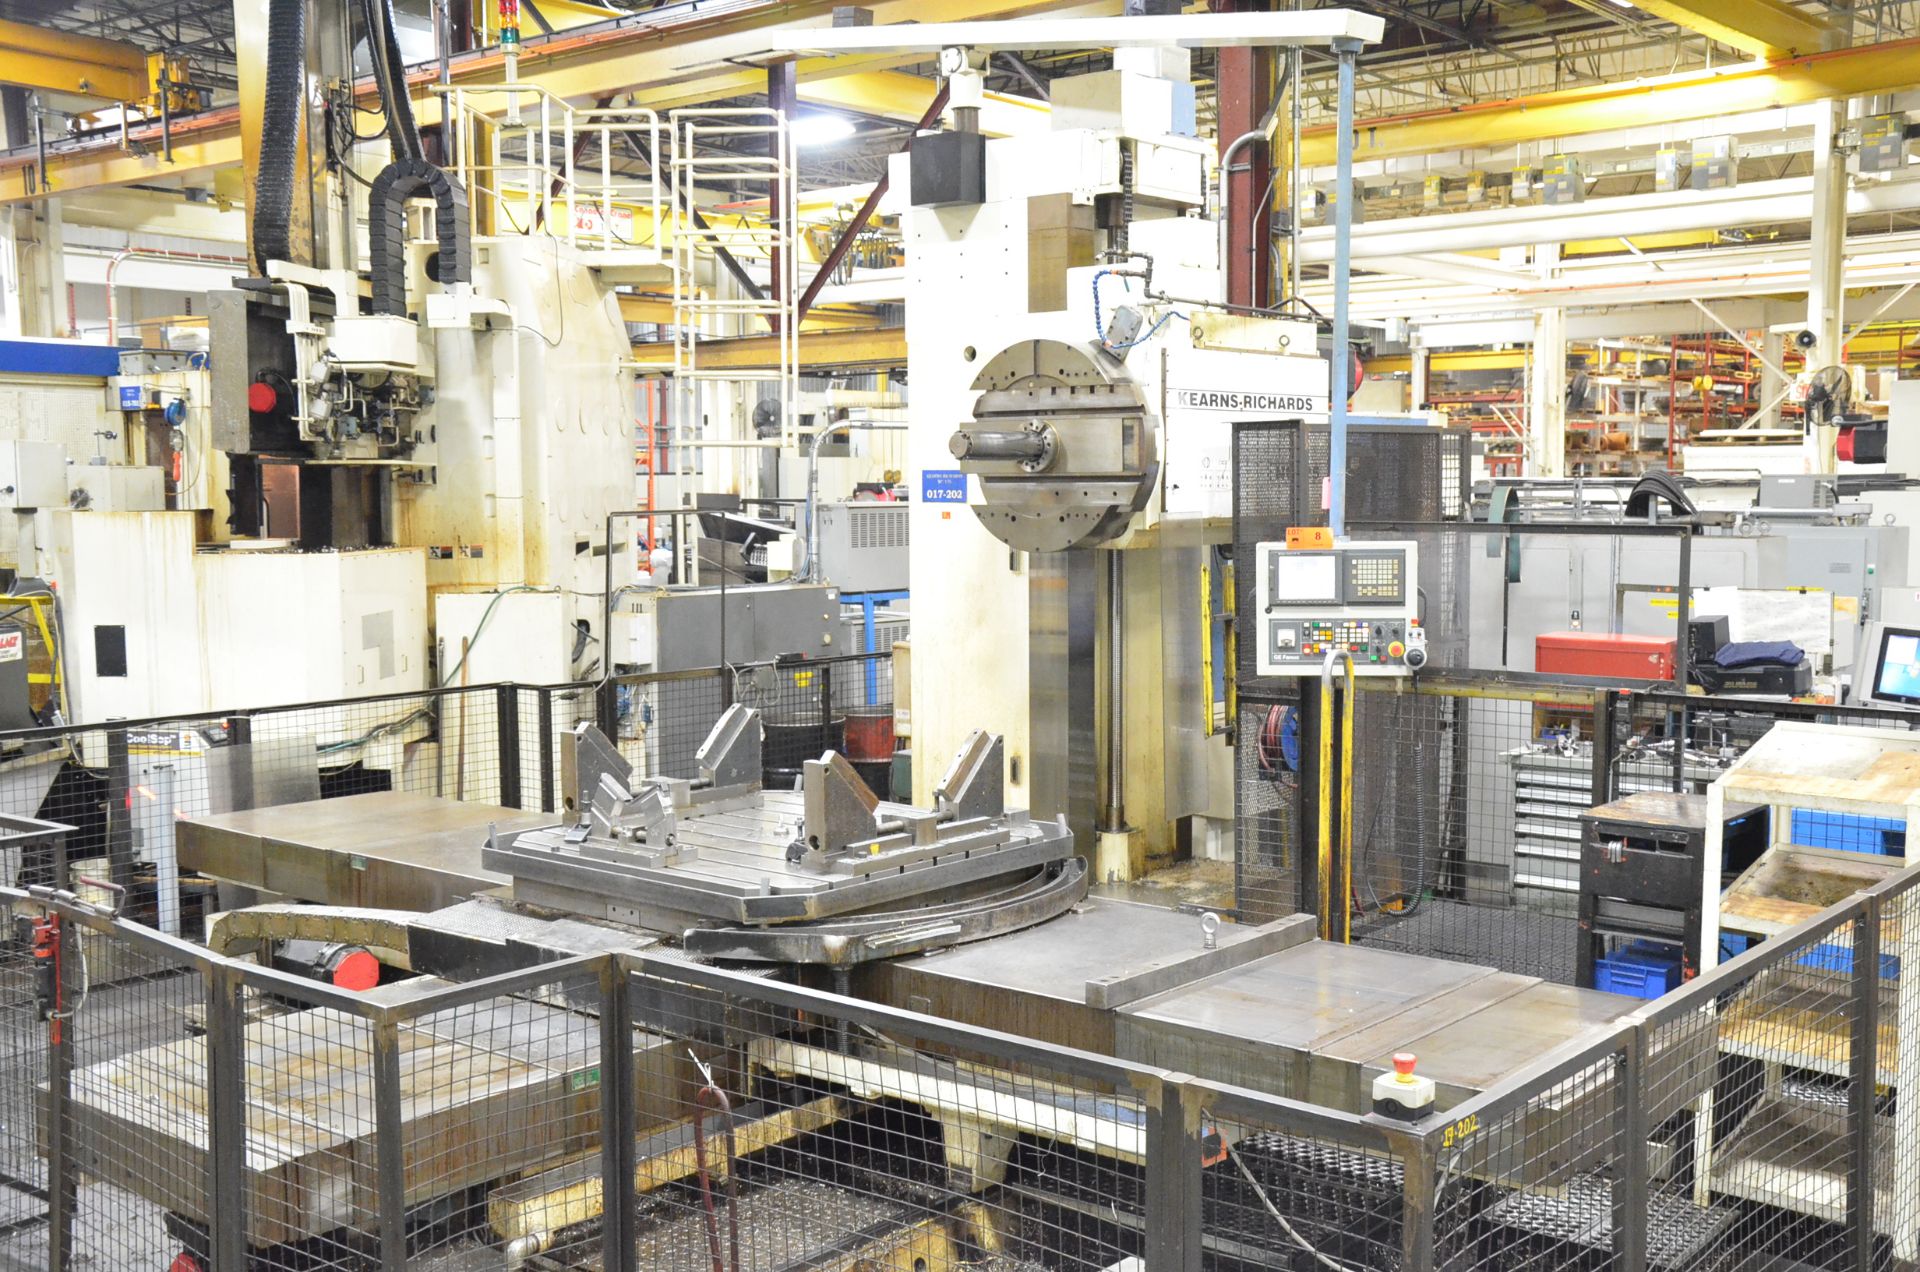 KEARNS & RICHARDS (R&R 2002) 125L CNC TABLE TYPE HORIZONTAL BORING MILL WITH FANUC 18I-M 5 AXIS - Image 2 of 41